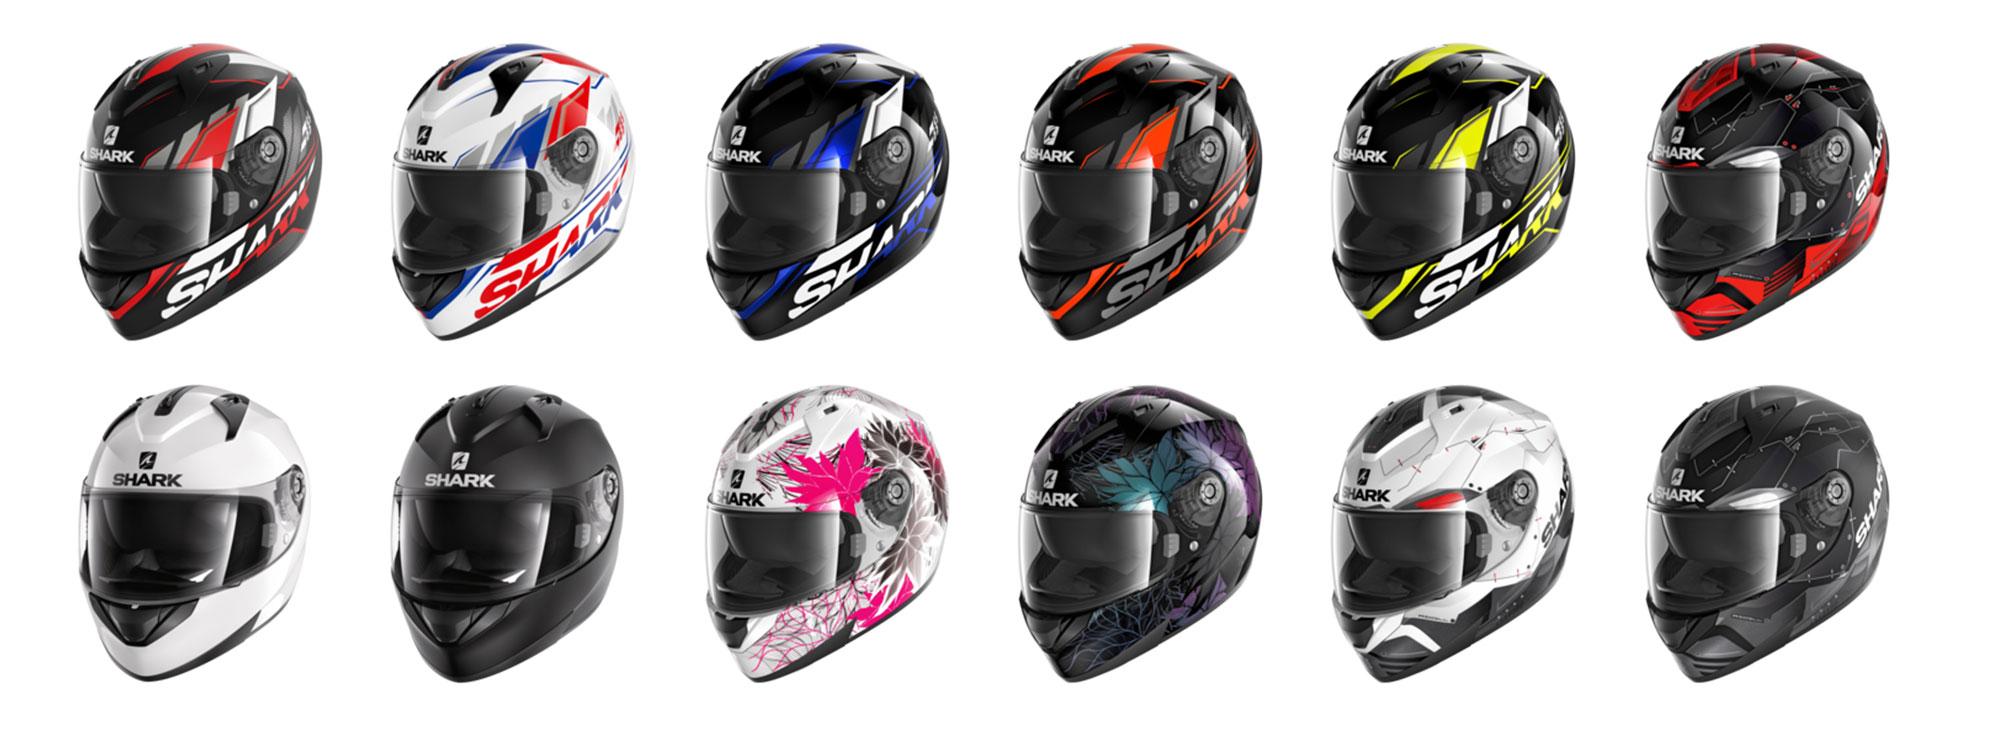 Various colorways for the Shark Ridill 1.2 Helmet